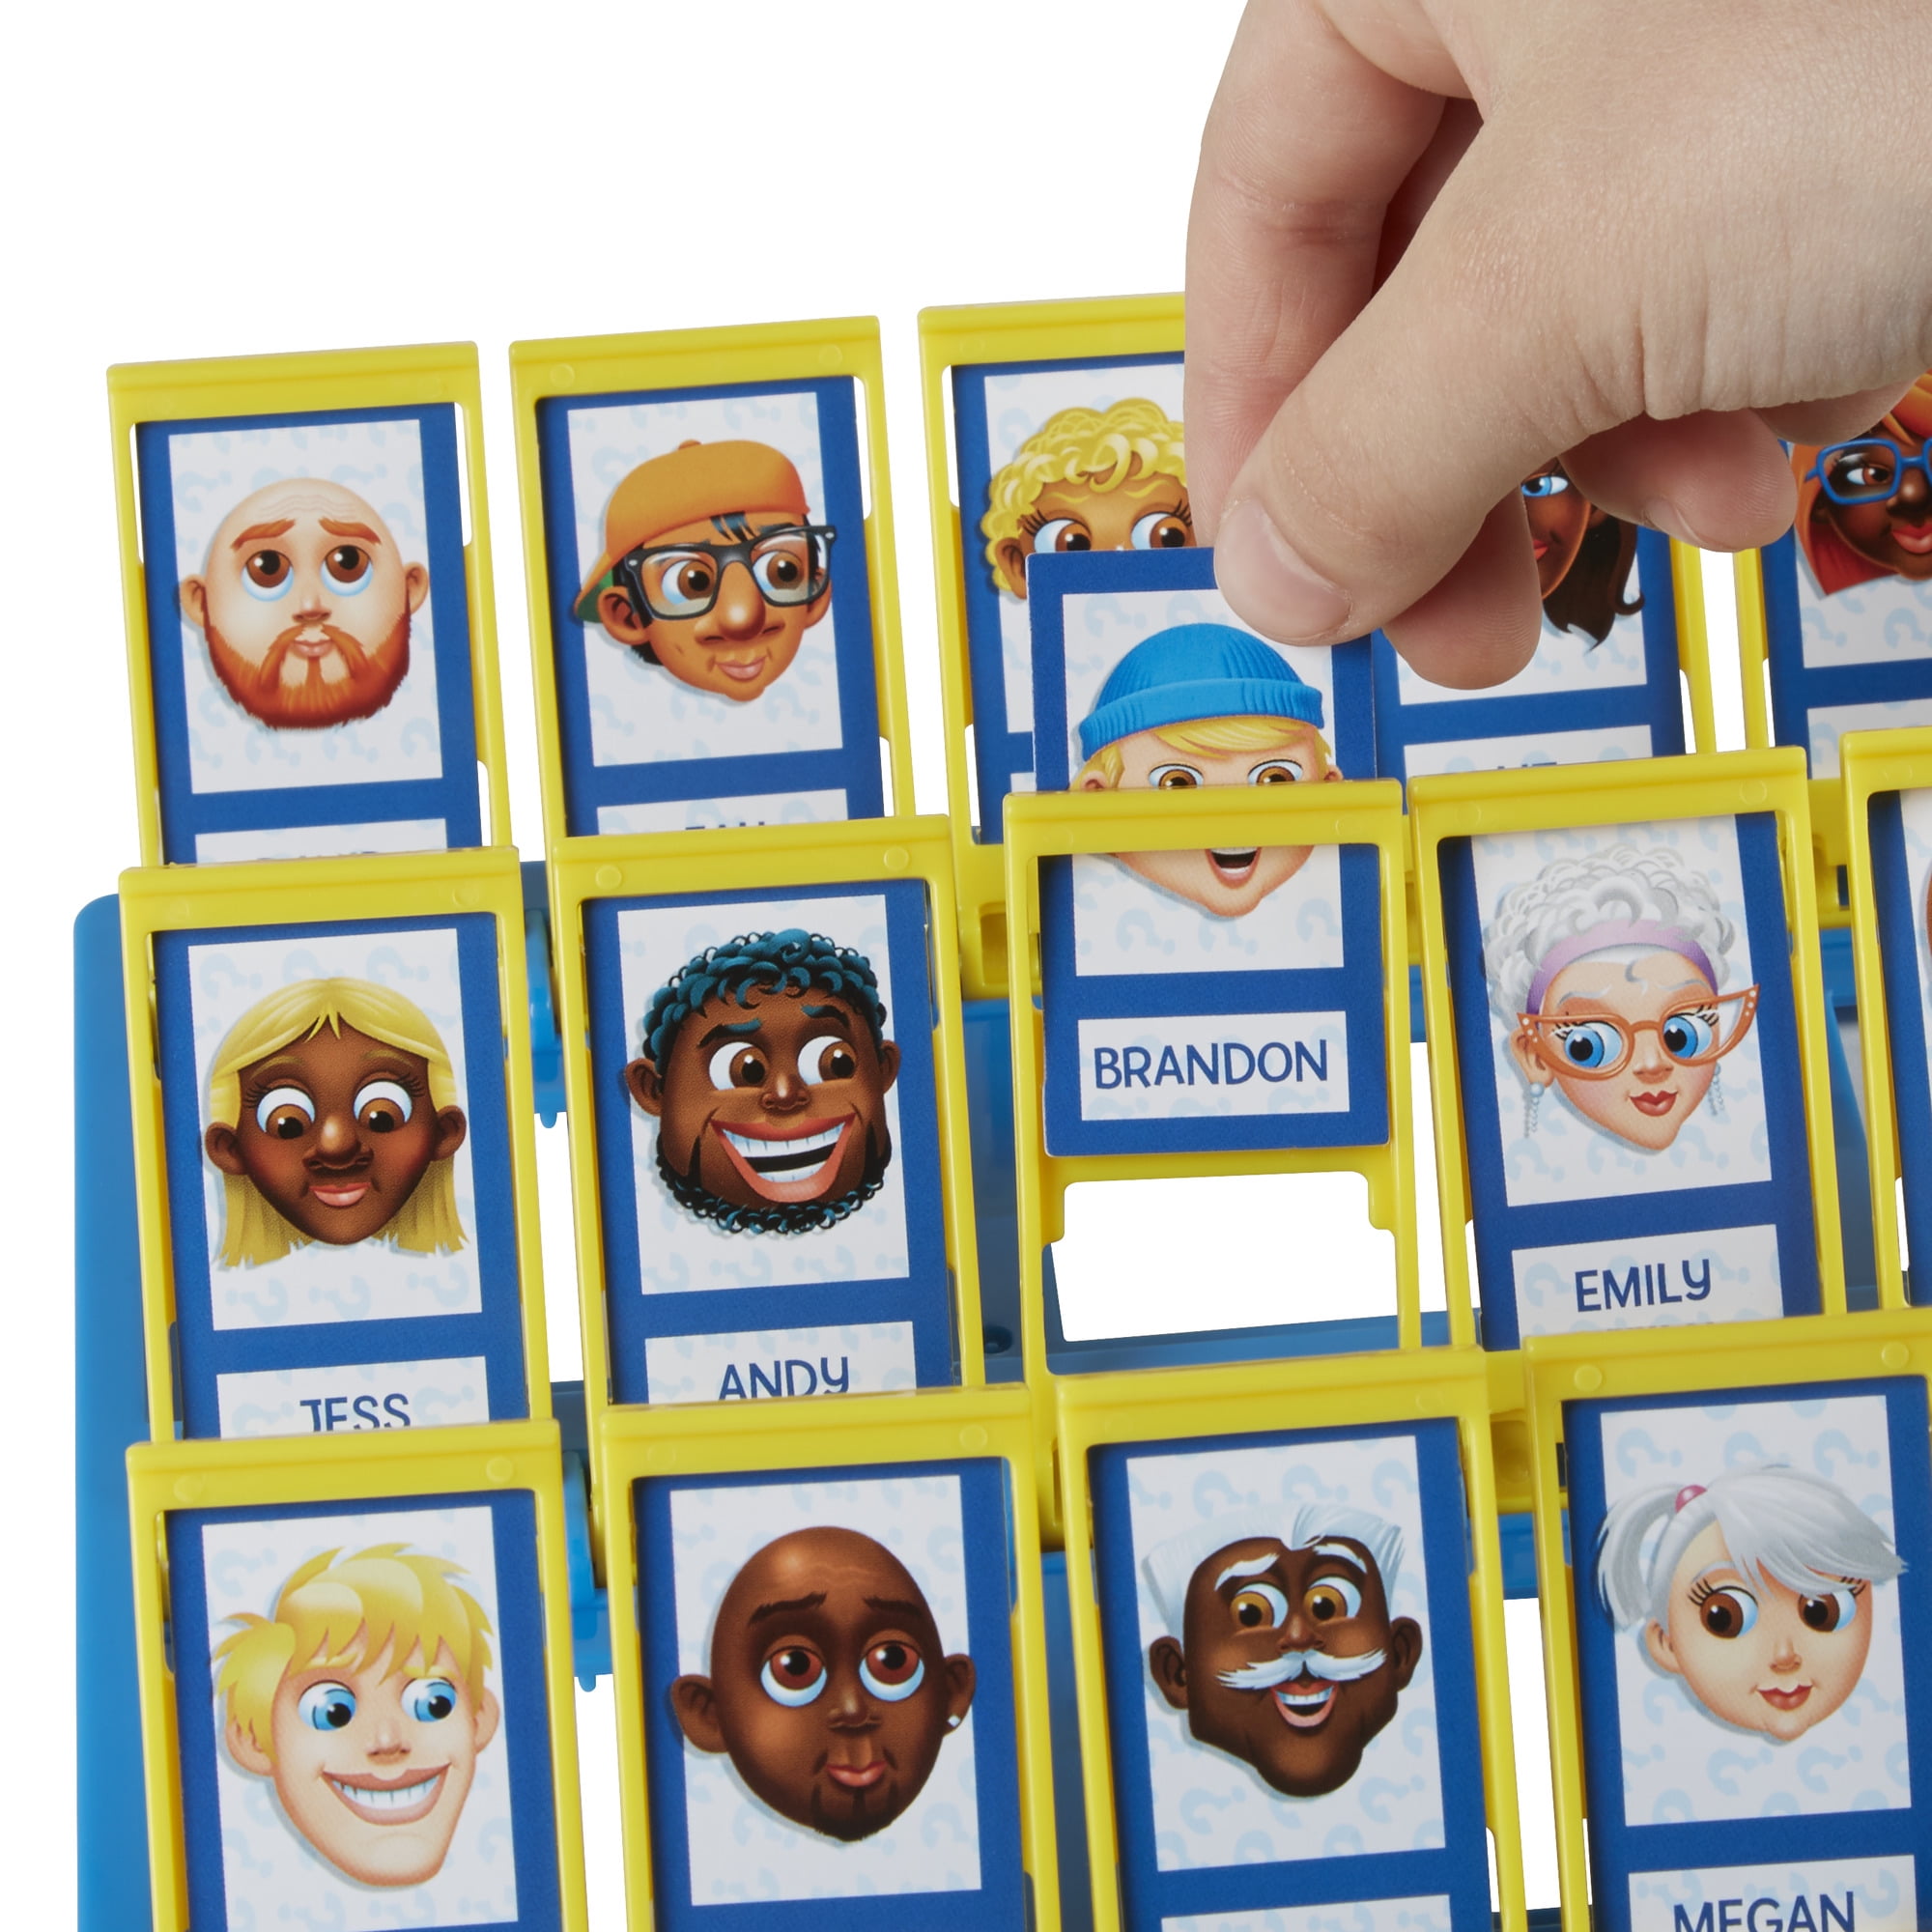 Classic Guess Who Original Guessing Game Ages 6 And Up